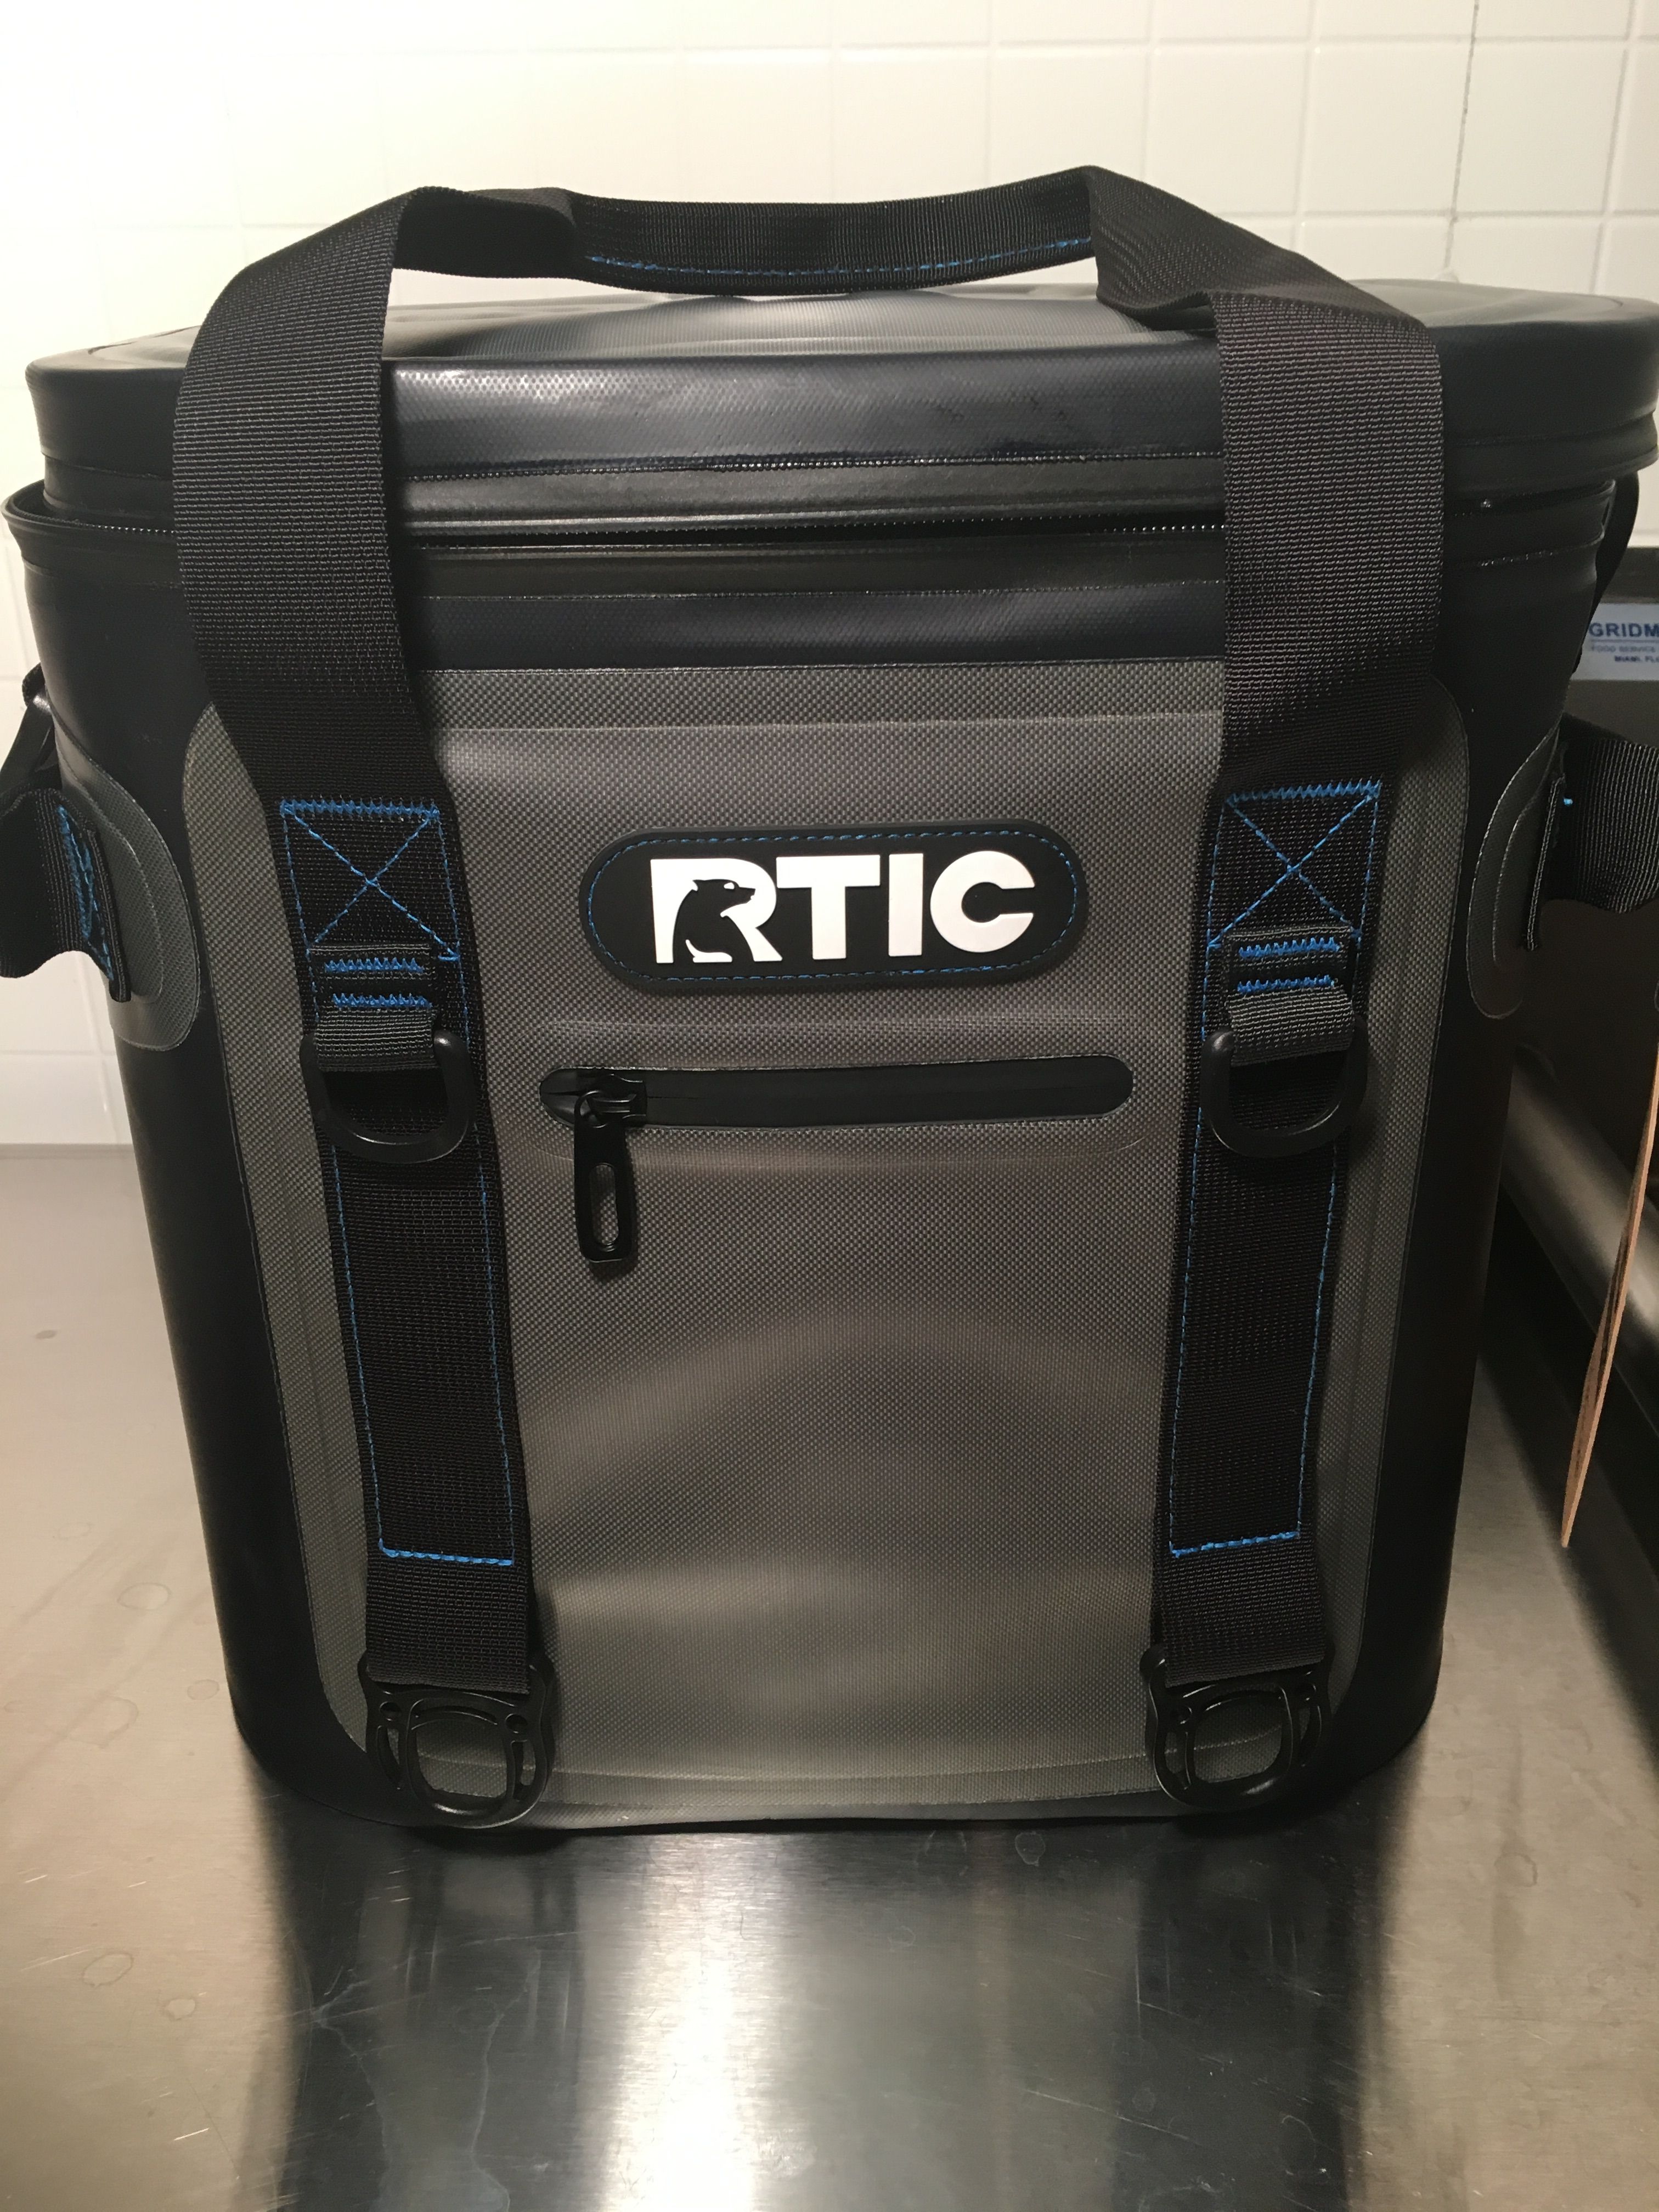 RTIC Soft Cooler 30 Can Review - Is It Worth It? 